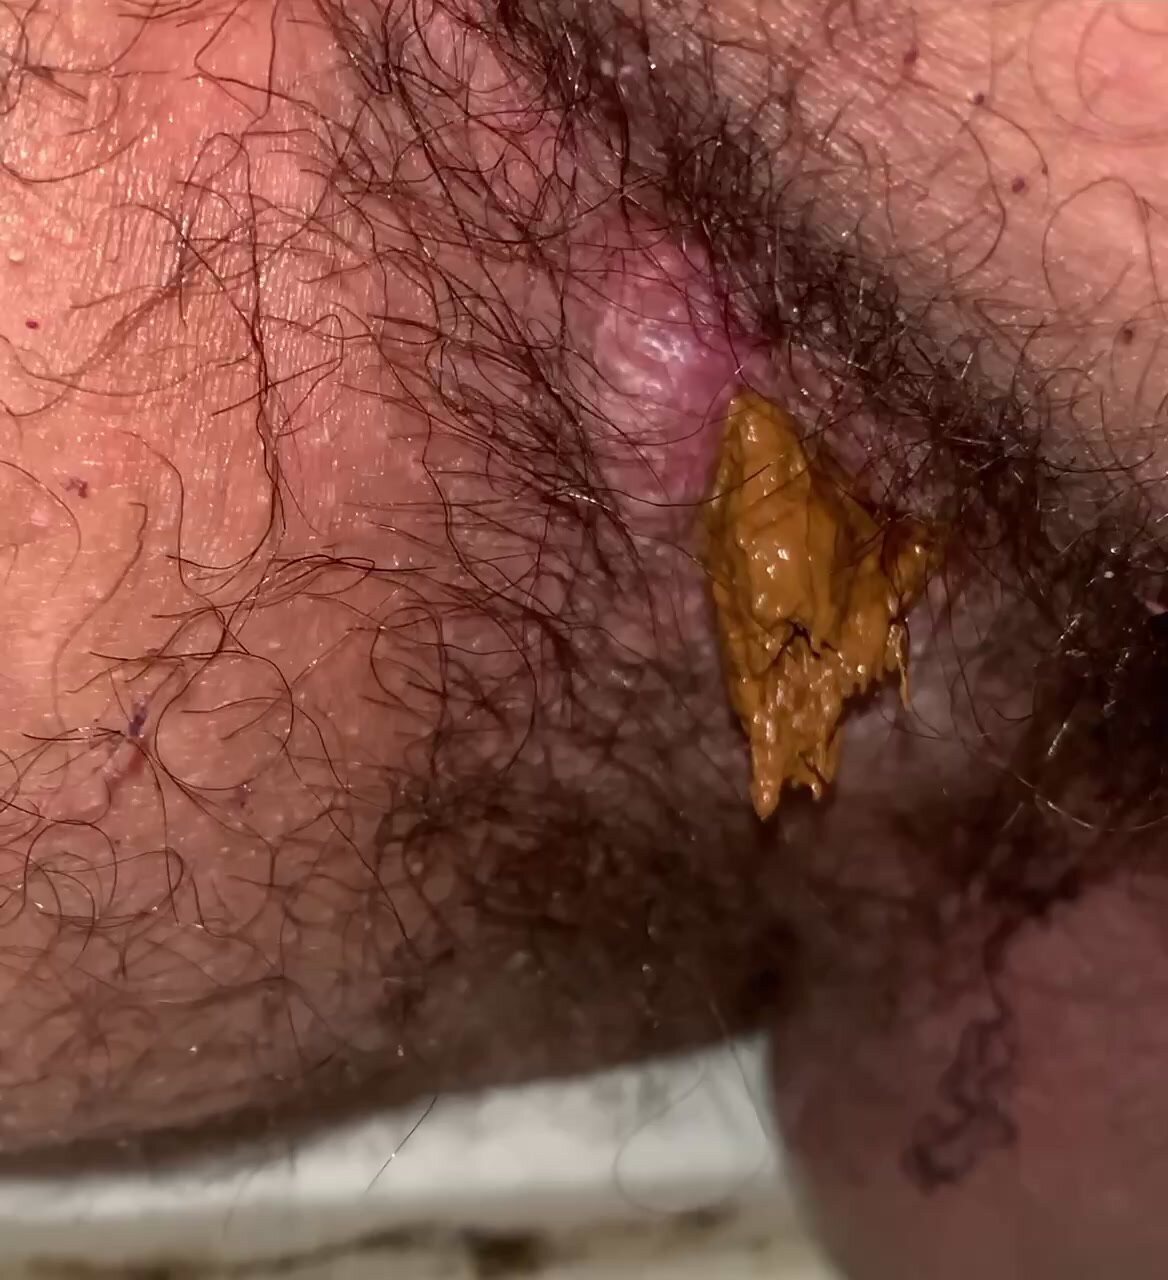 Teen scat after holding for a long time